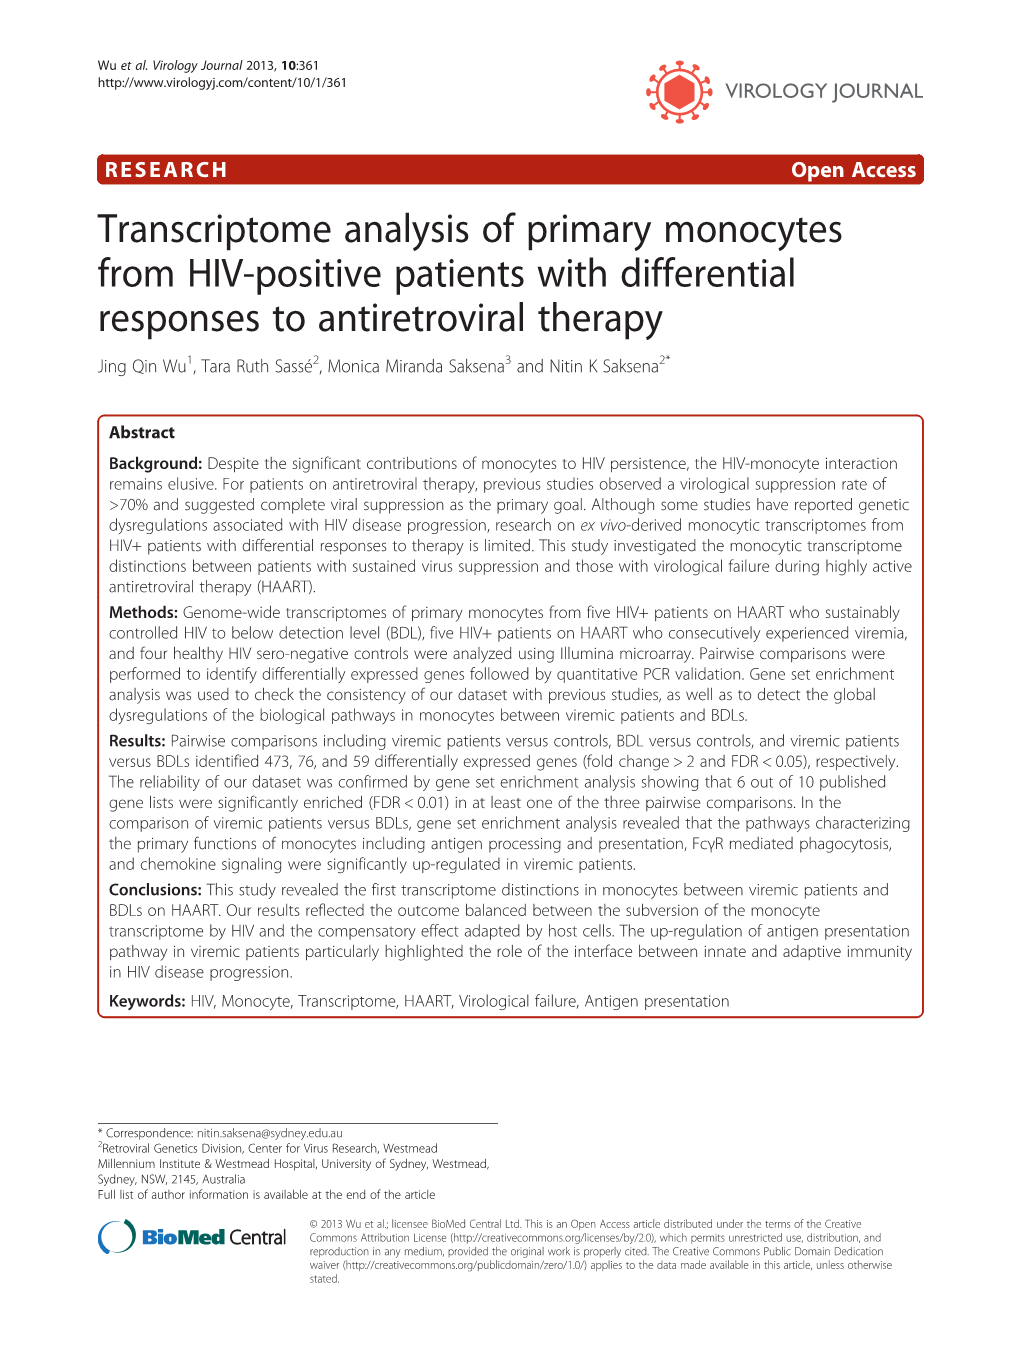 Transcriptome Analysis of Primary Monocytes from HIV-Positive Patients with Differential Responses to Antiretroviral Therapy